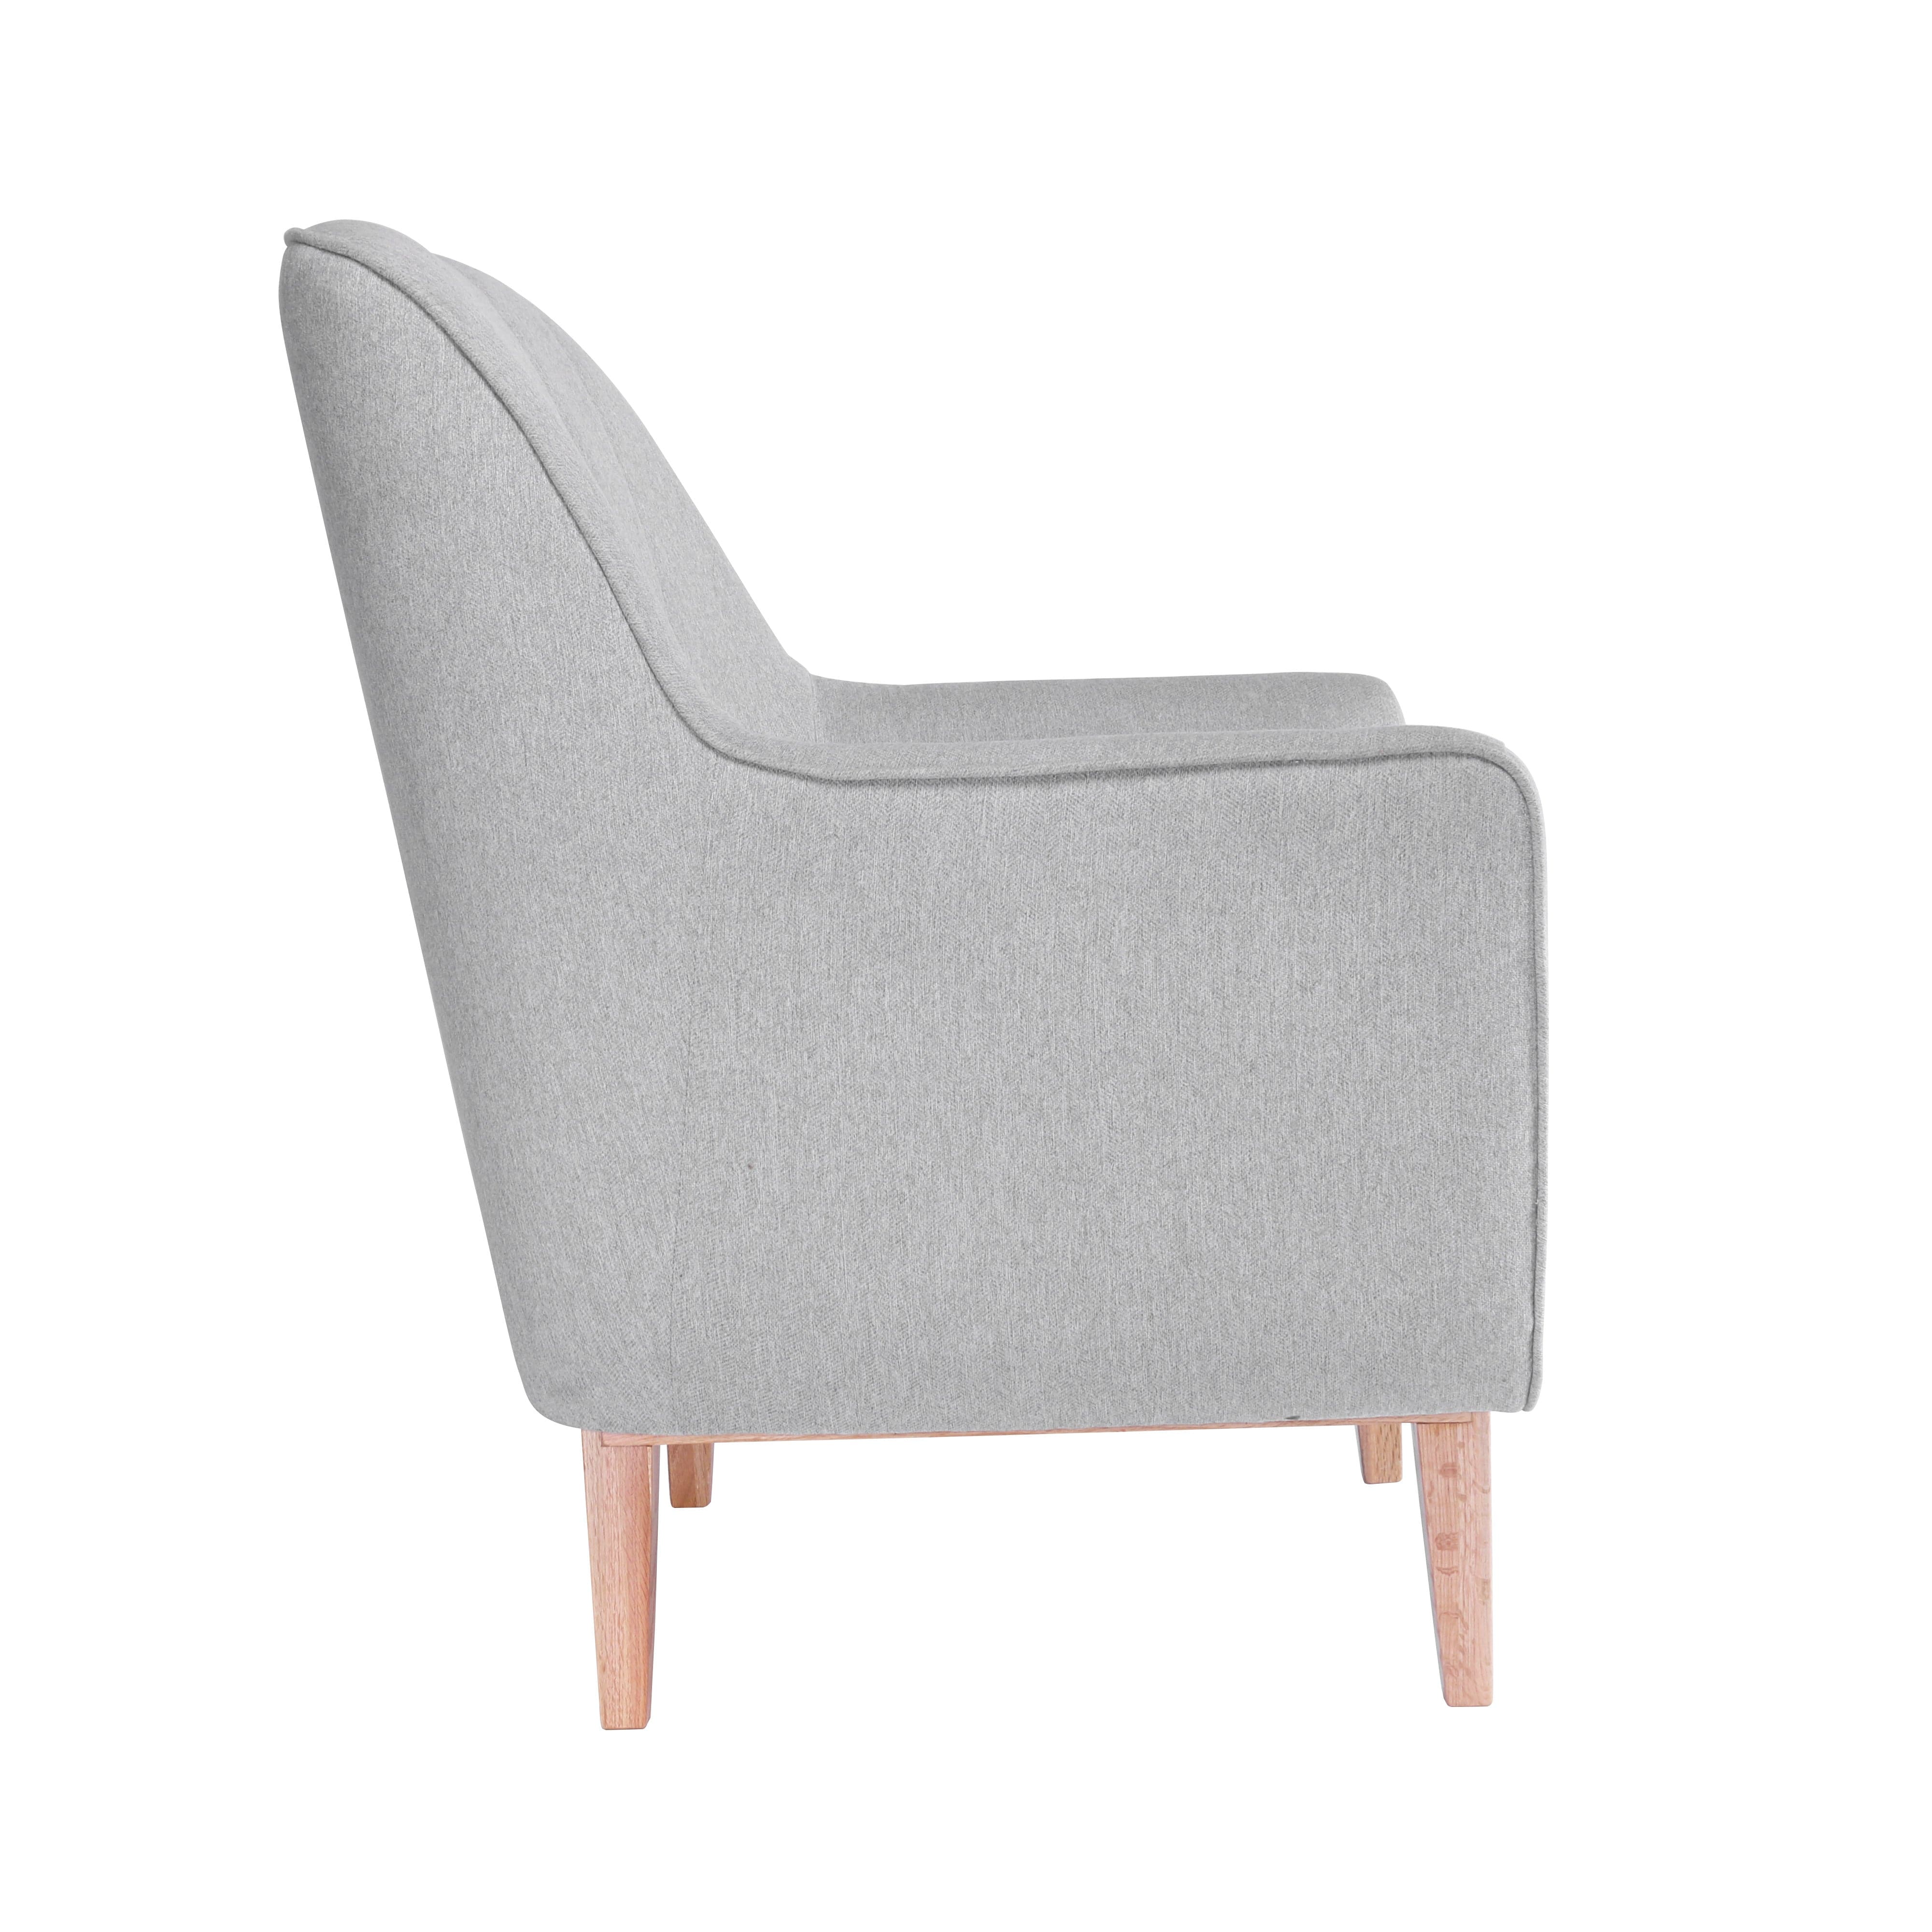 Tutti Bambini Noah Rocking Chair - Pebble/Grey - For Your Little One